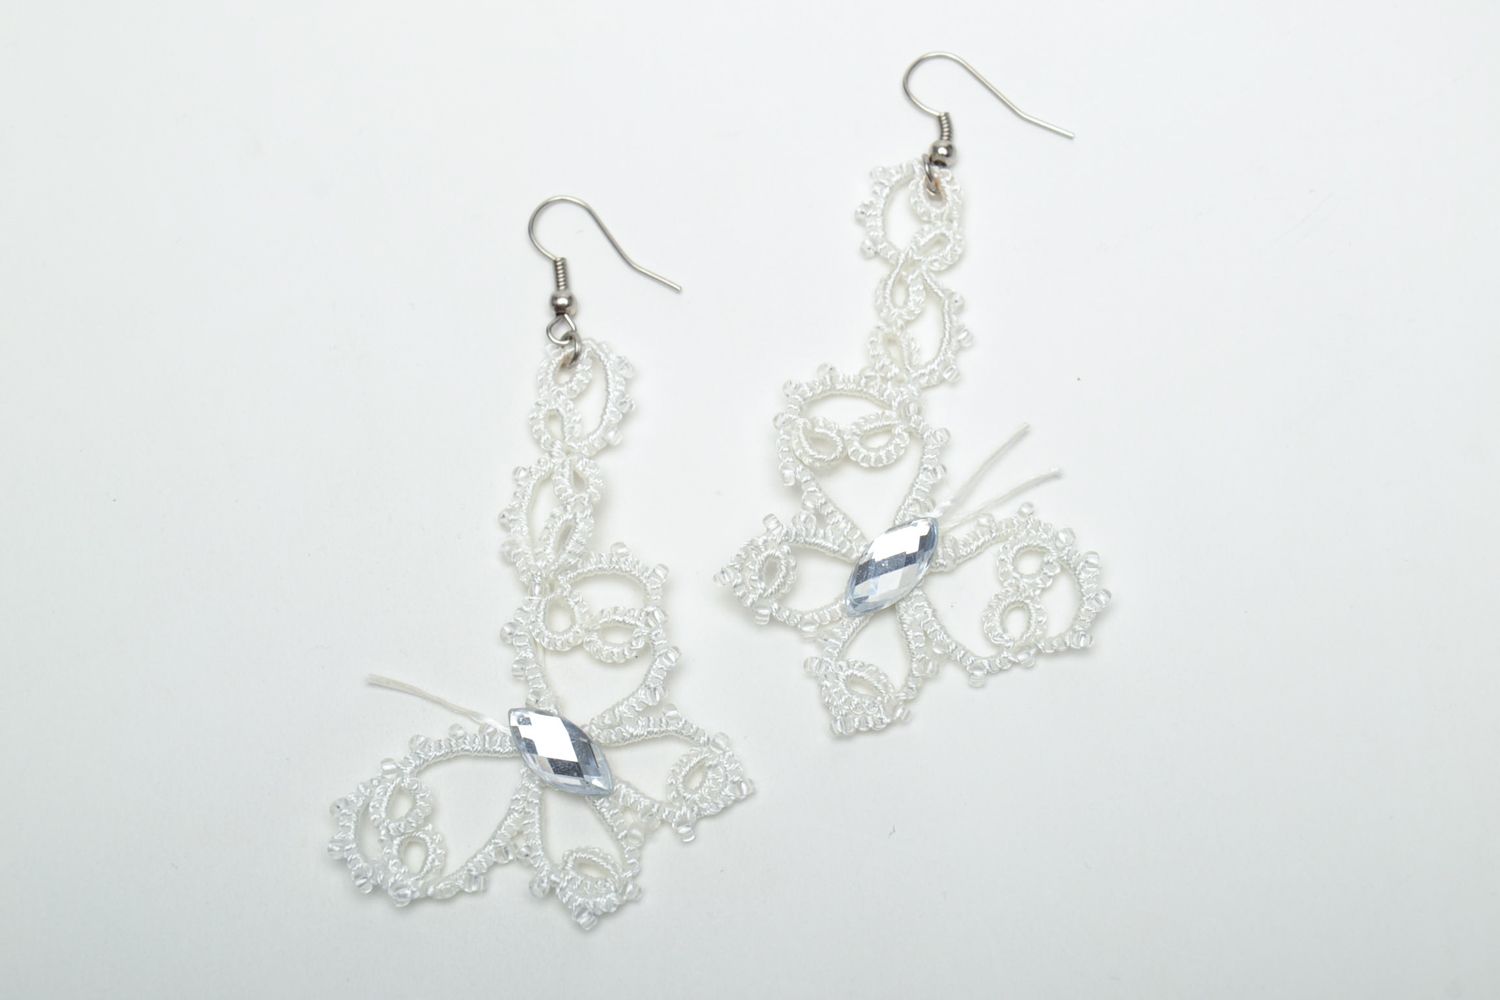 Lace earrings with beads made using tatting technique Butterflies photo 2